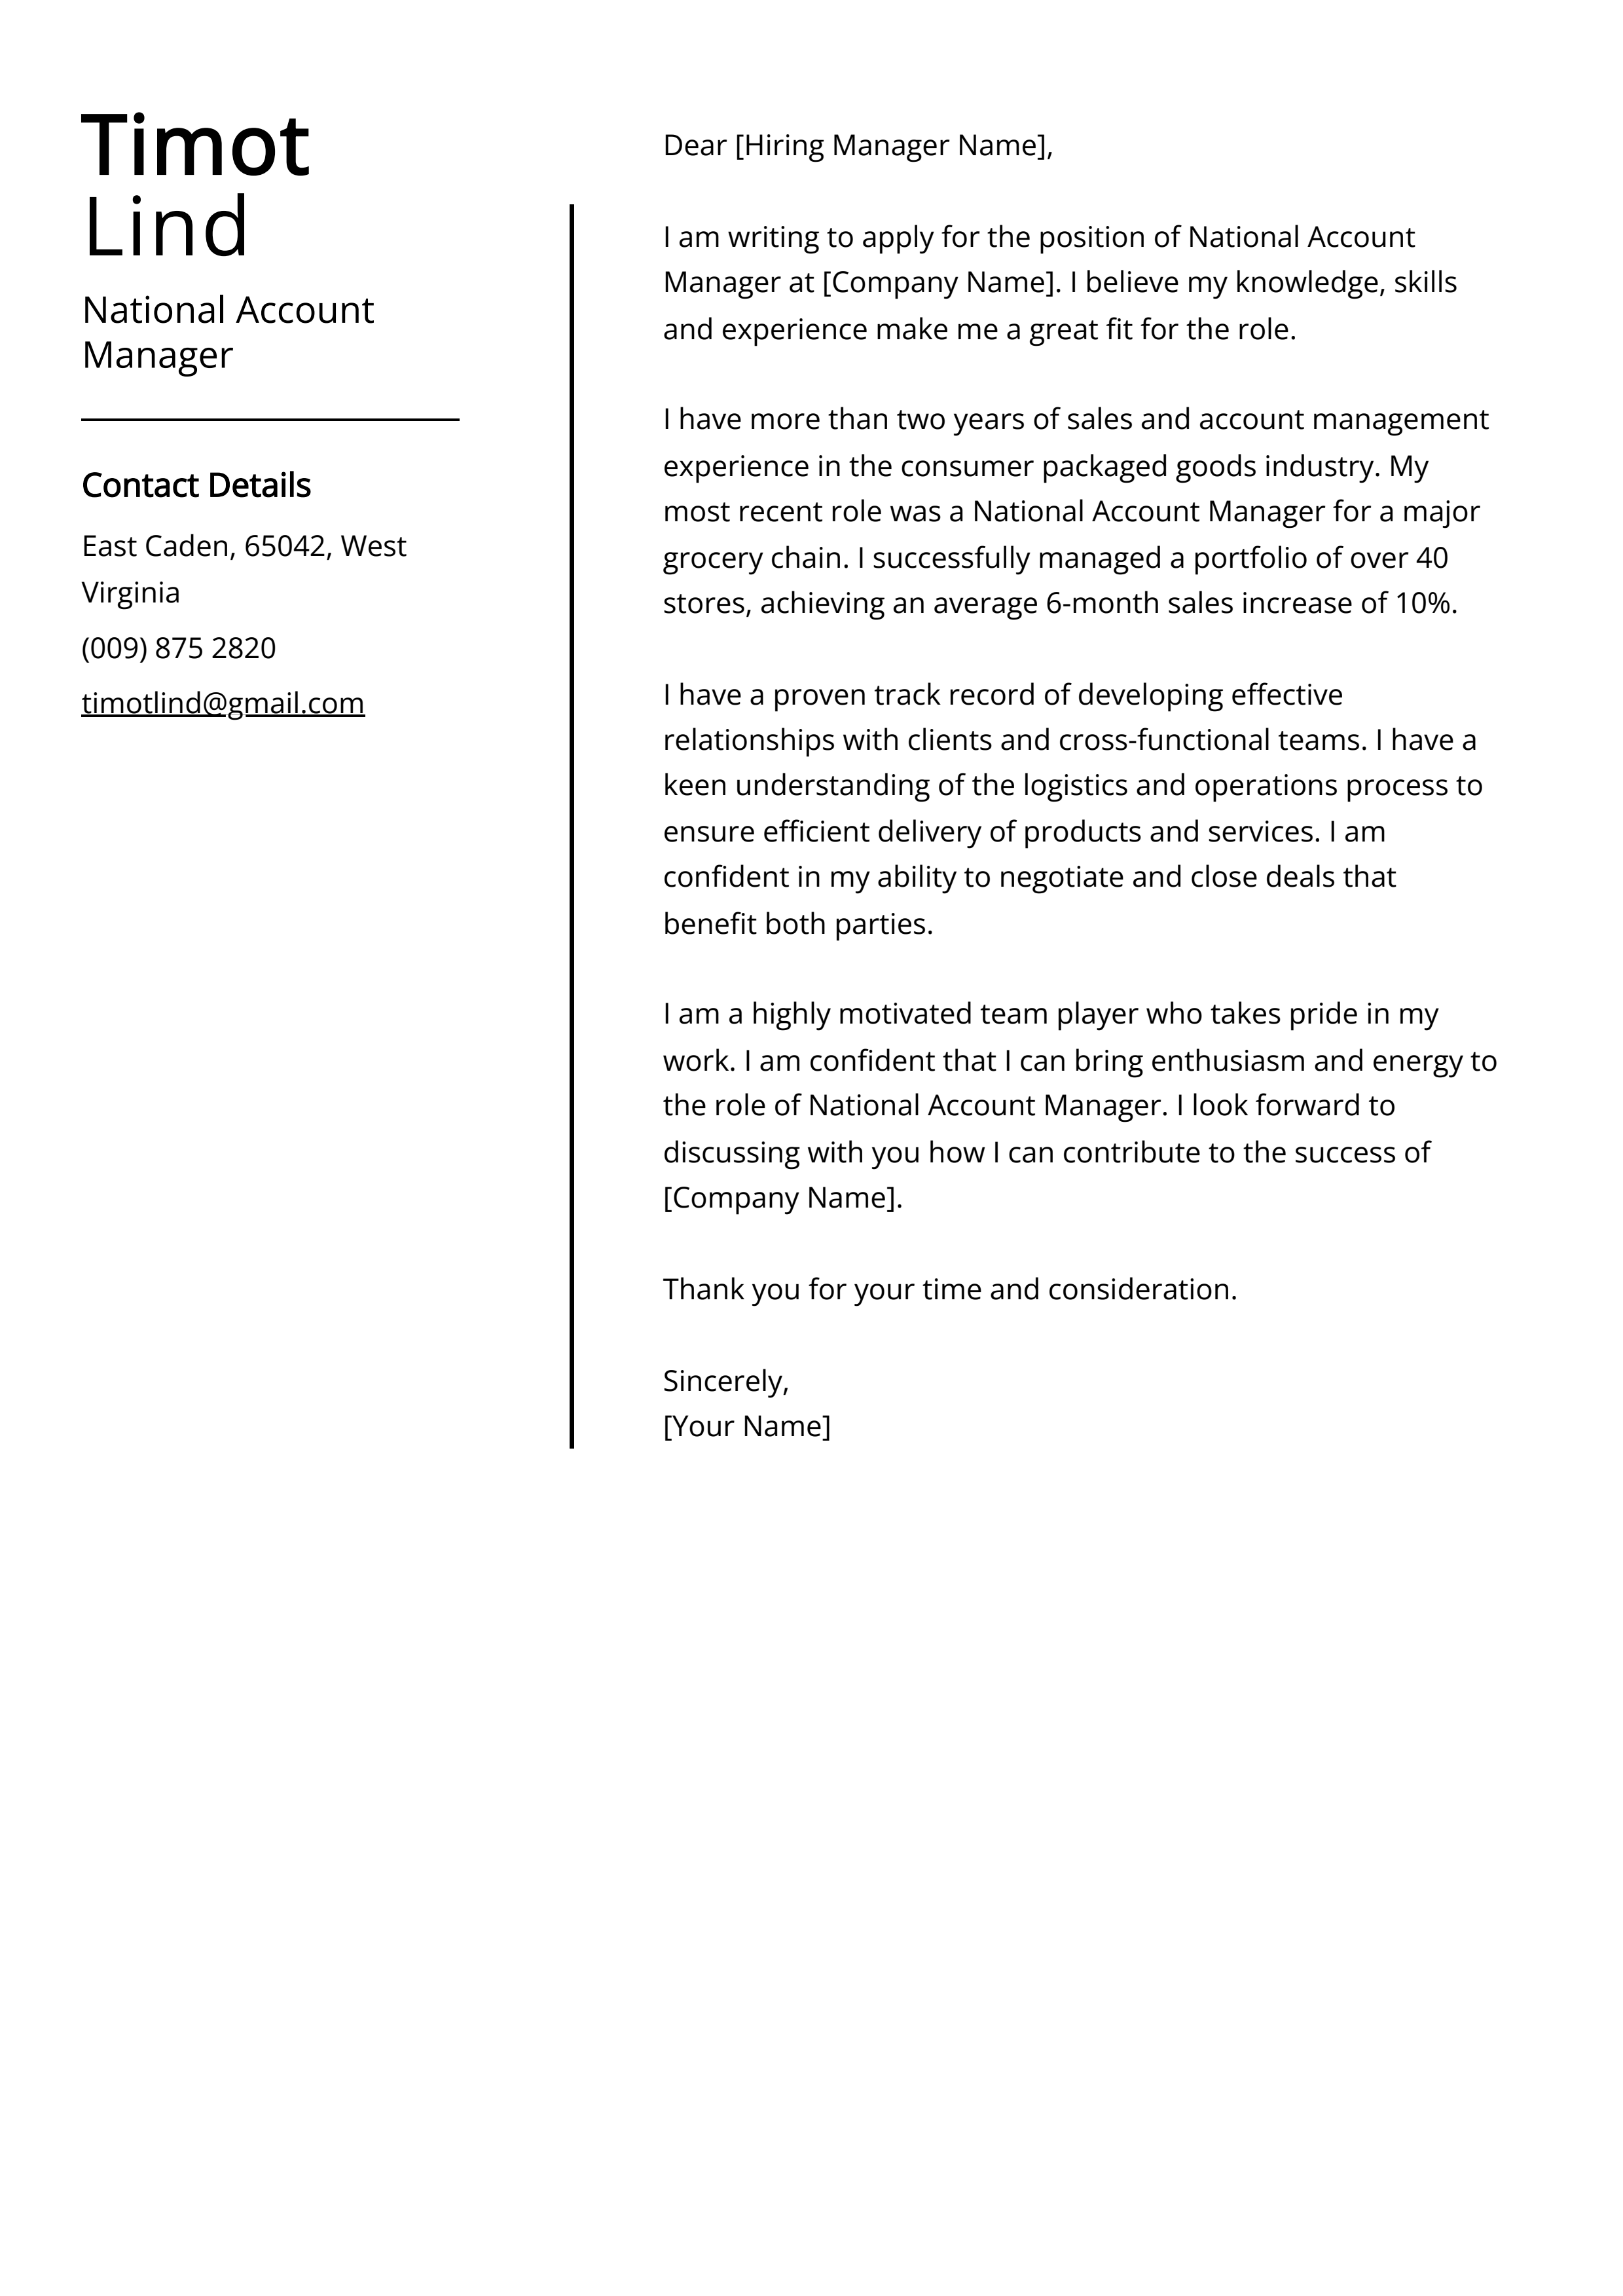 National Account Manager Cover Letter Example